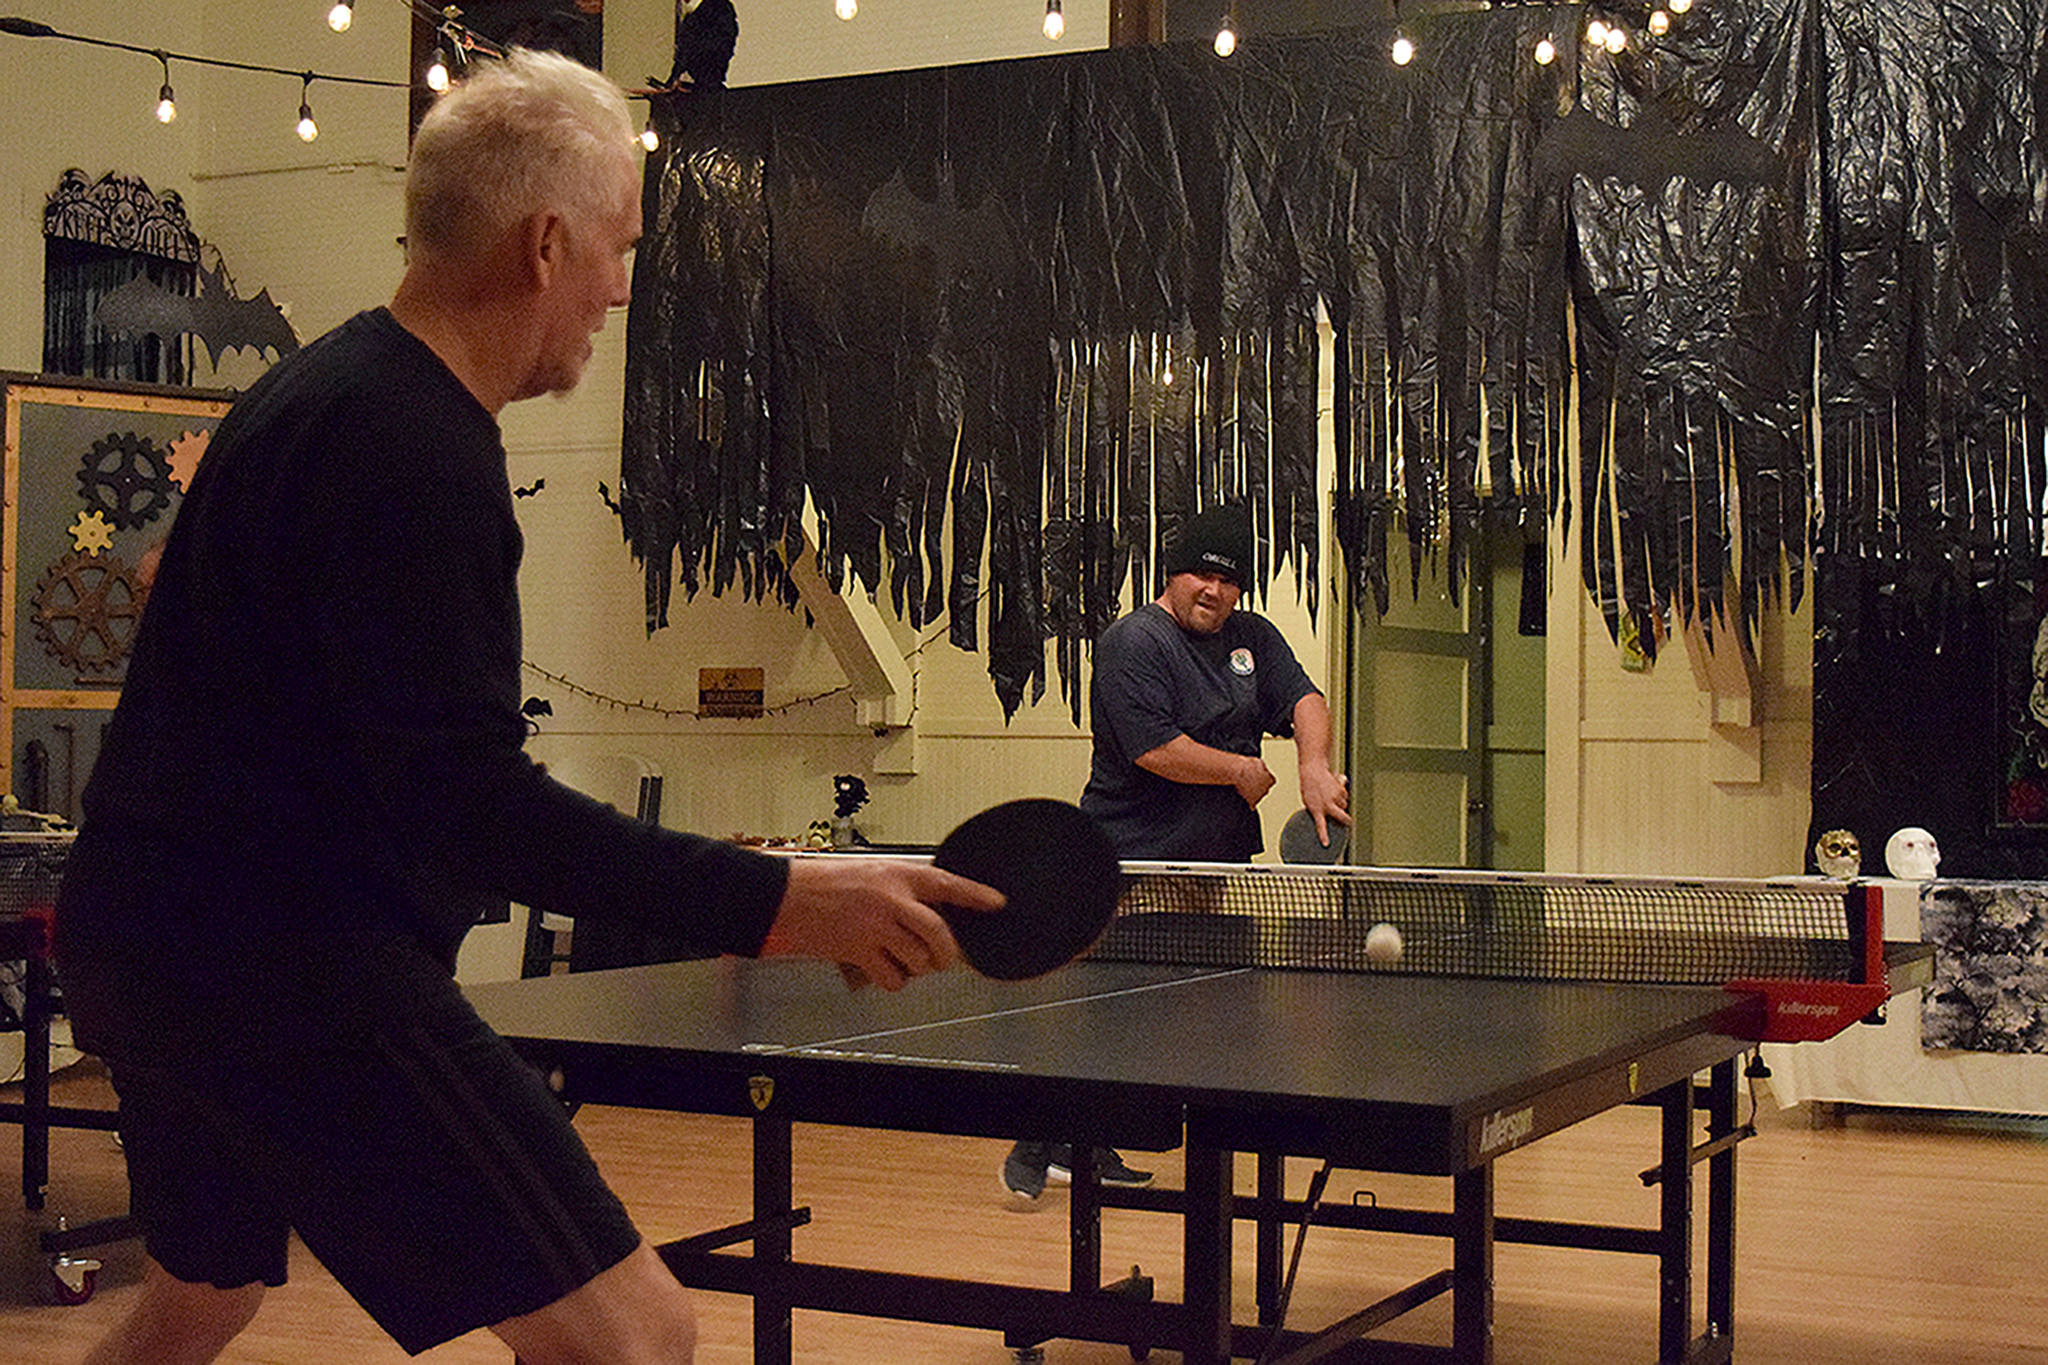 Ping-Pong Tuesdays attracting players from across island